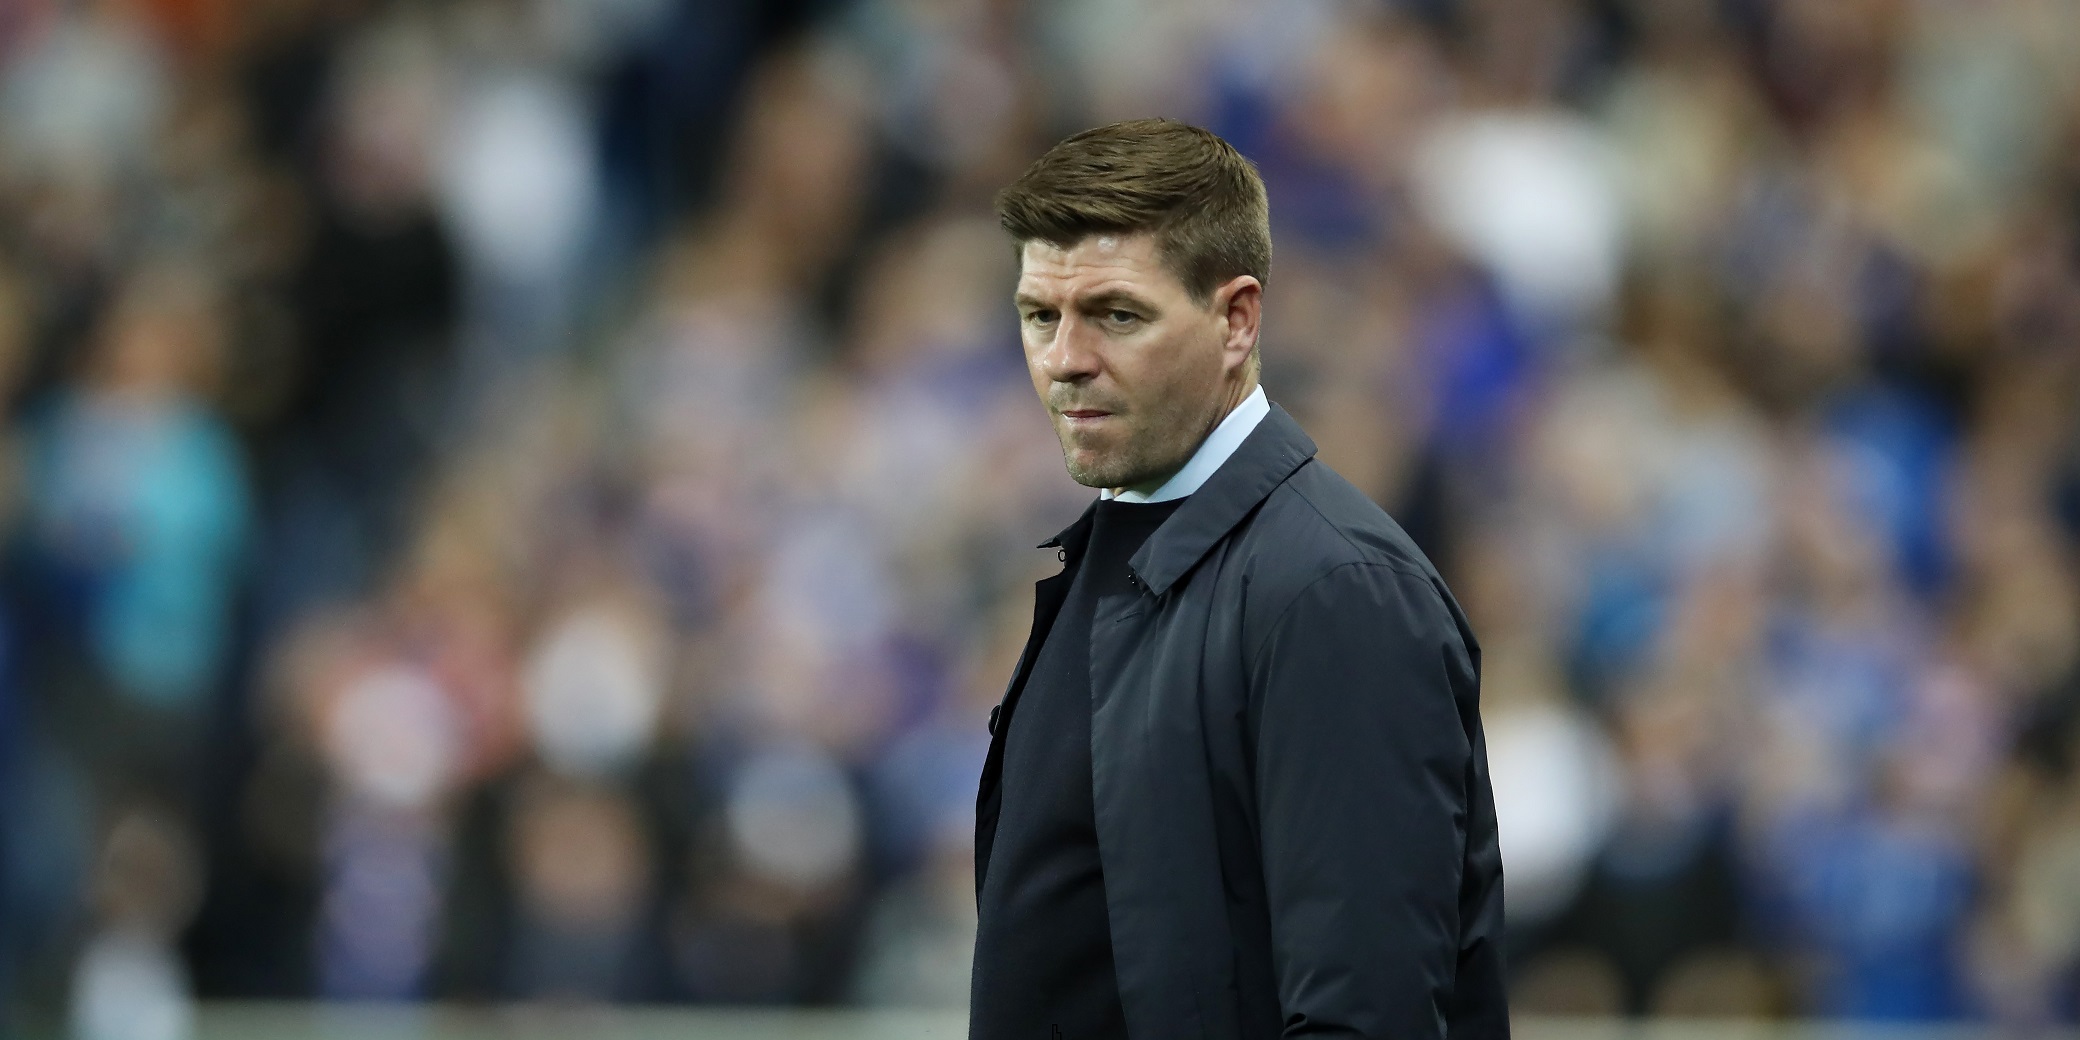 ‘Don’t like’ ‘Stepping stone’ – These Liverpool fans react as Gerrard is confirmed new Villa boss